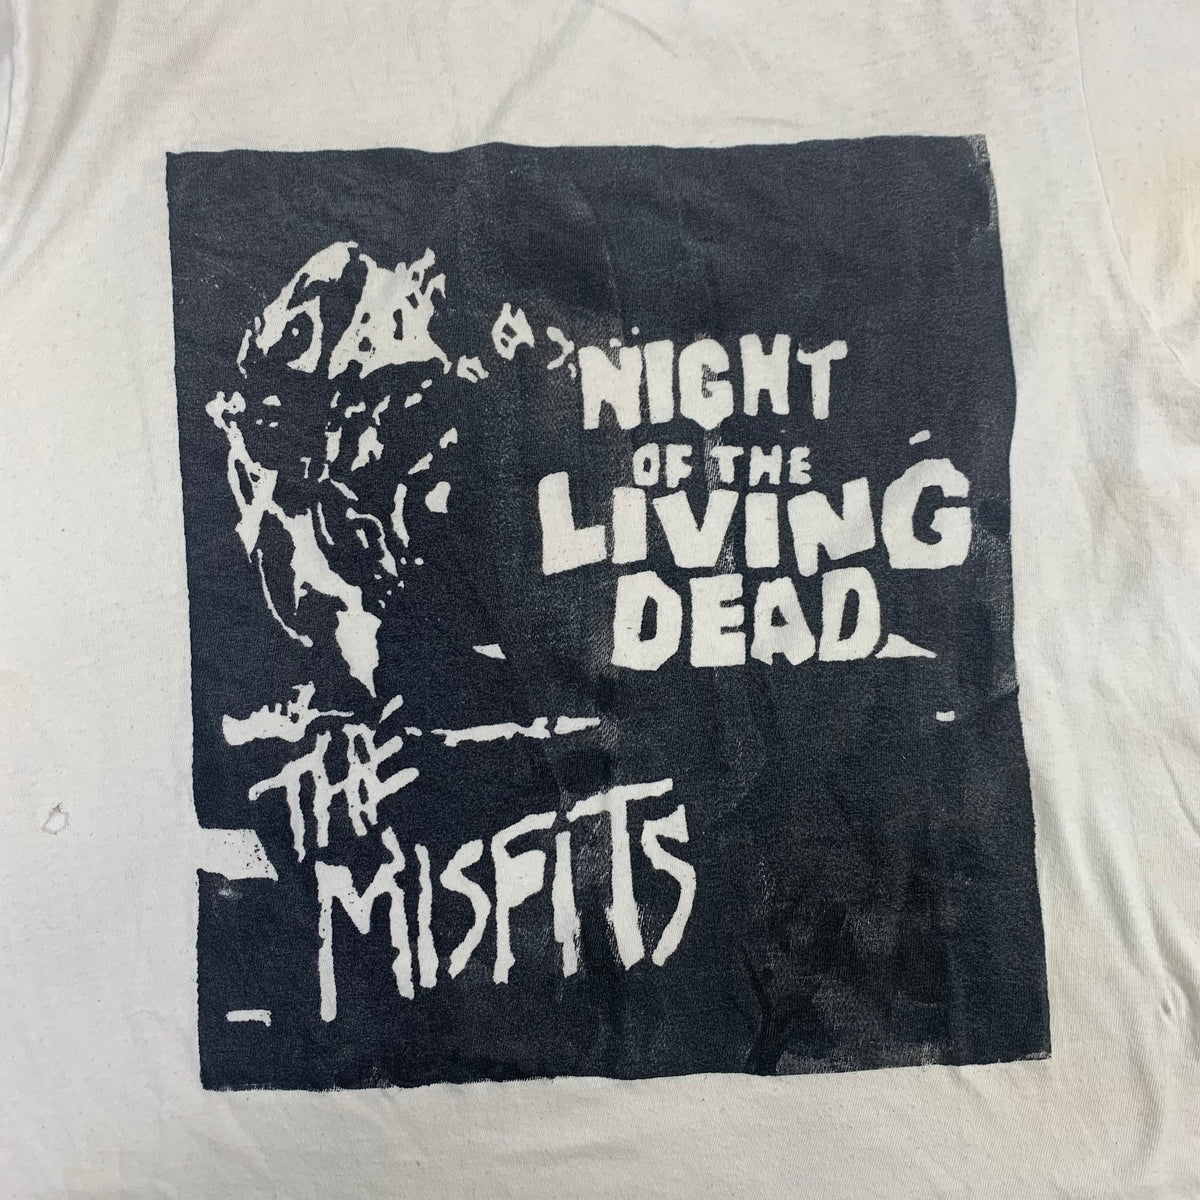 Vintage The Misfits &quot;Night Of The Living Dead&quot; T-Shirt